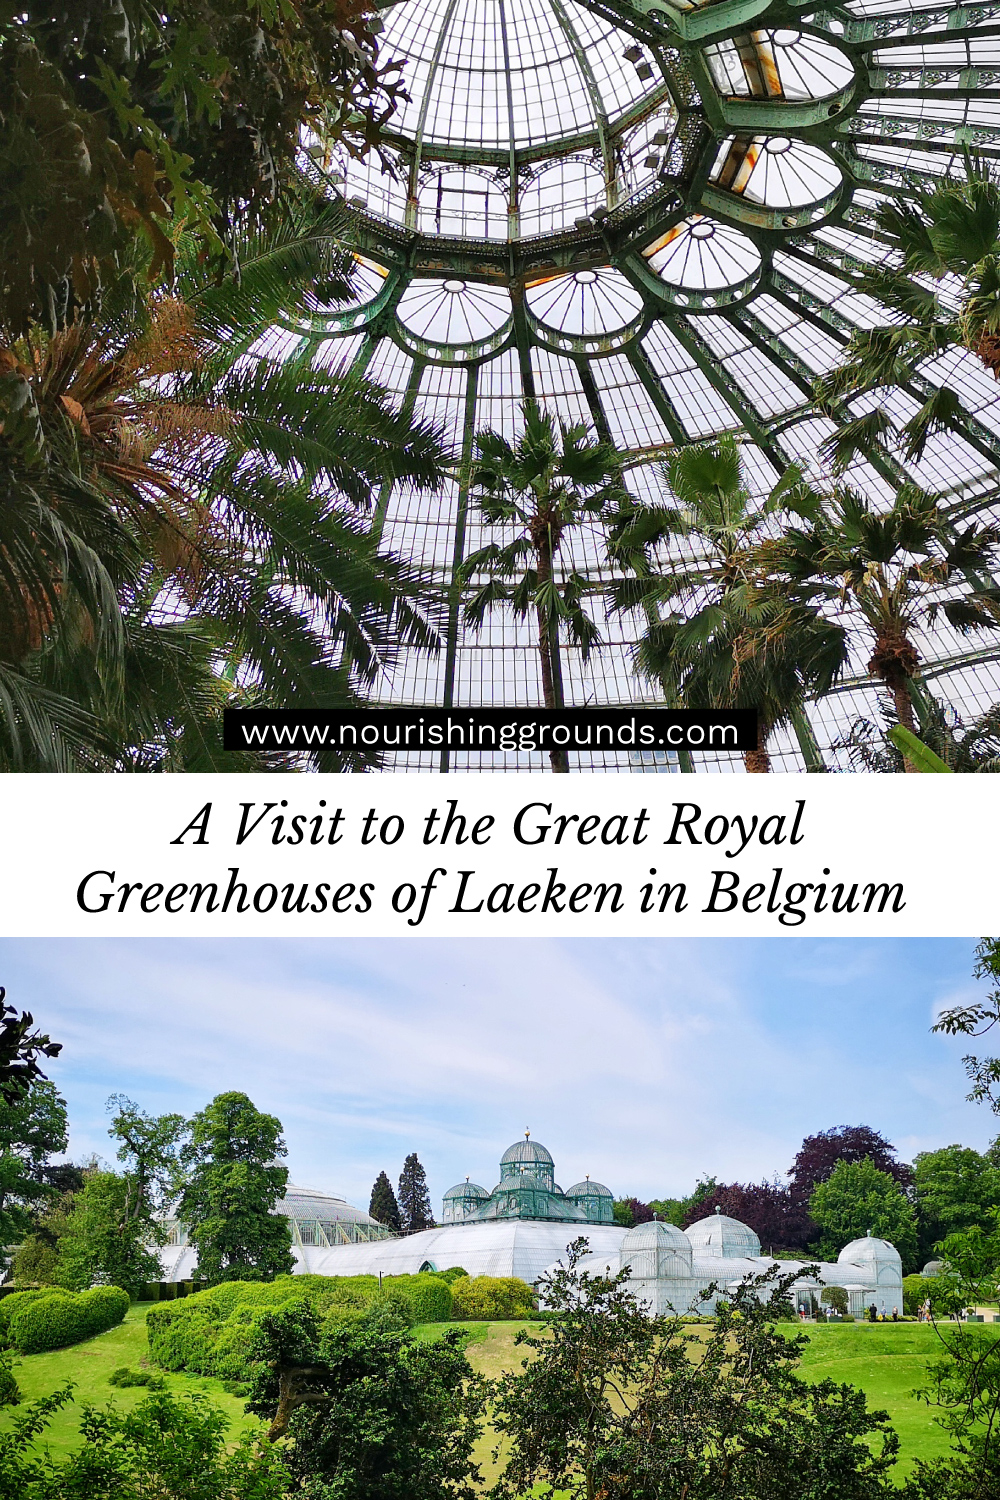 A Visit to the Great Royal Greenhouses of Laeken in Belgium